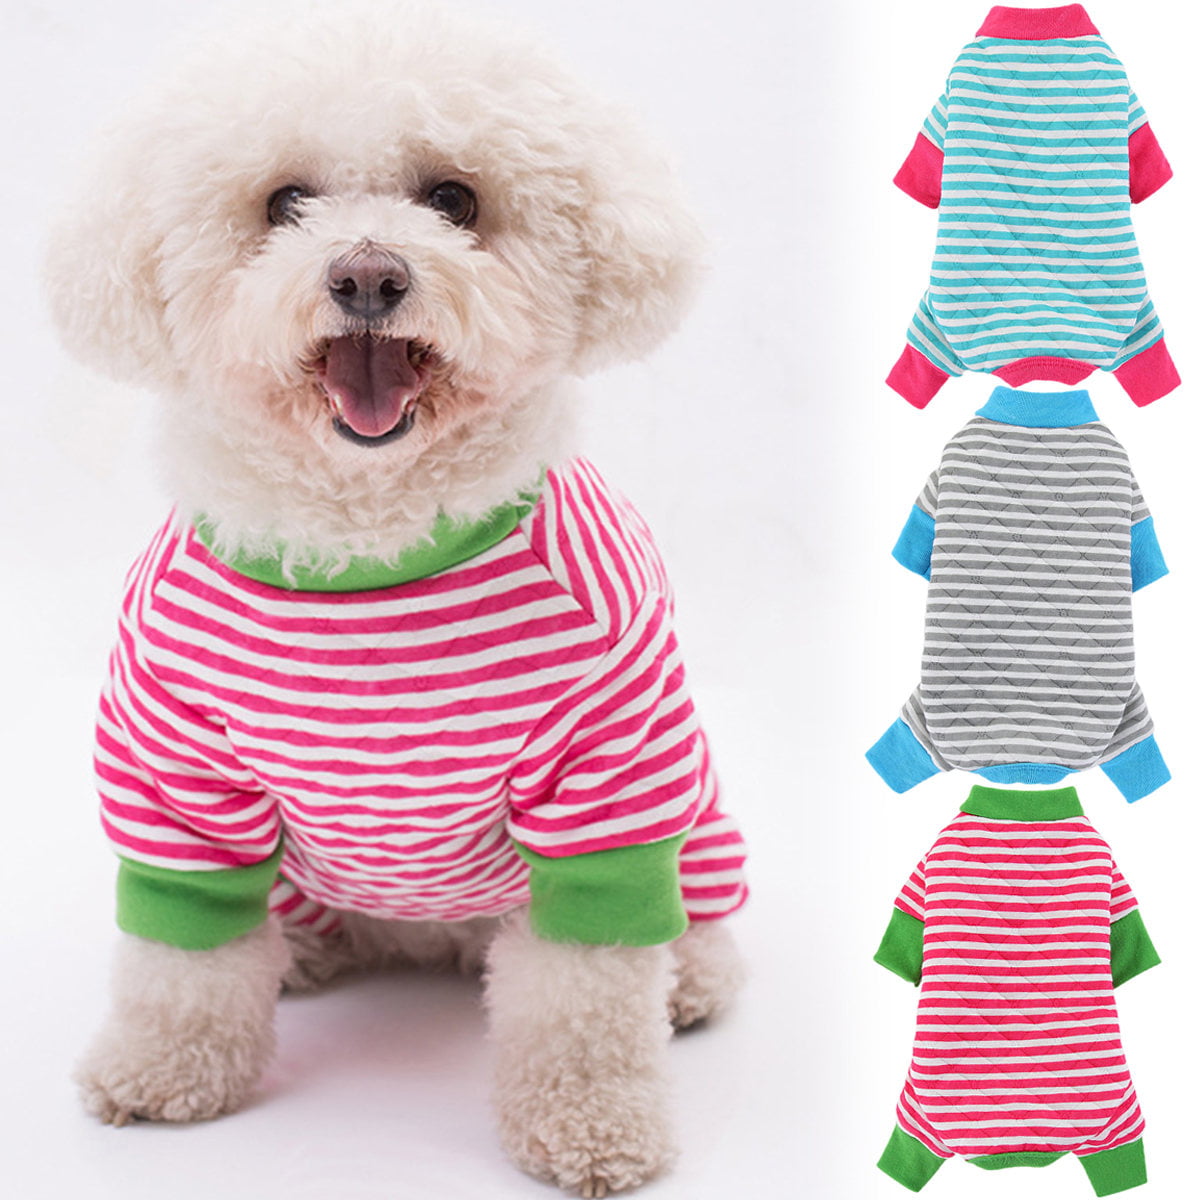 Turtleneck Red White Stripes Pet Clothes Dog Wool Sweaters for Teddy Chihuahua